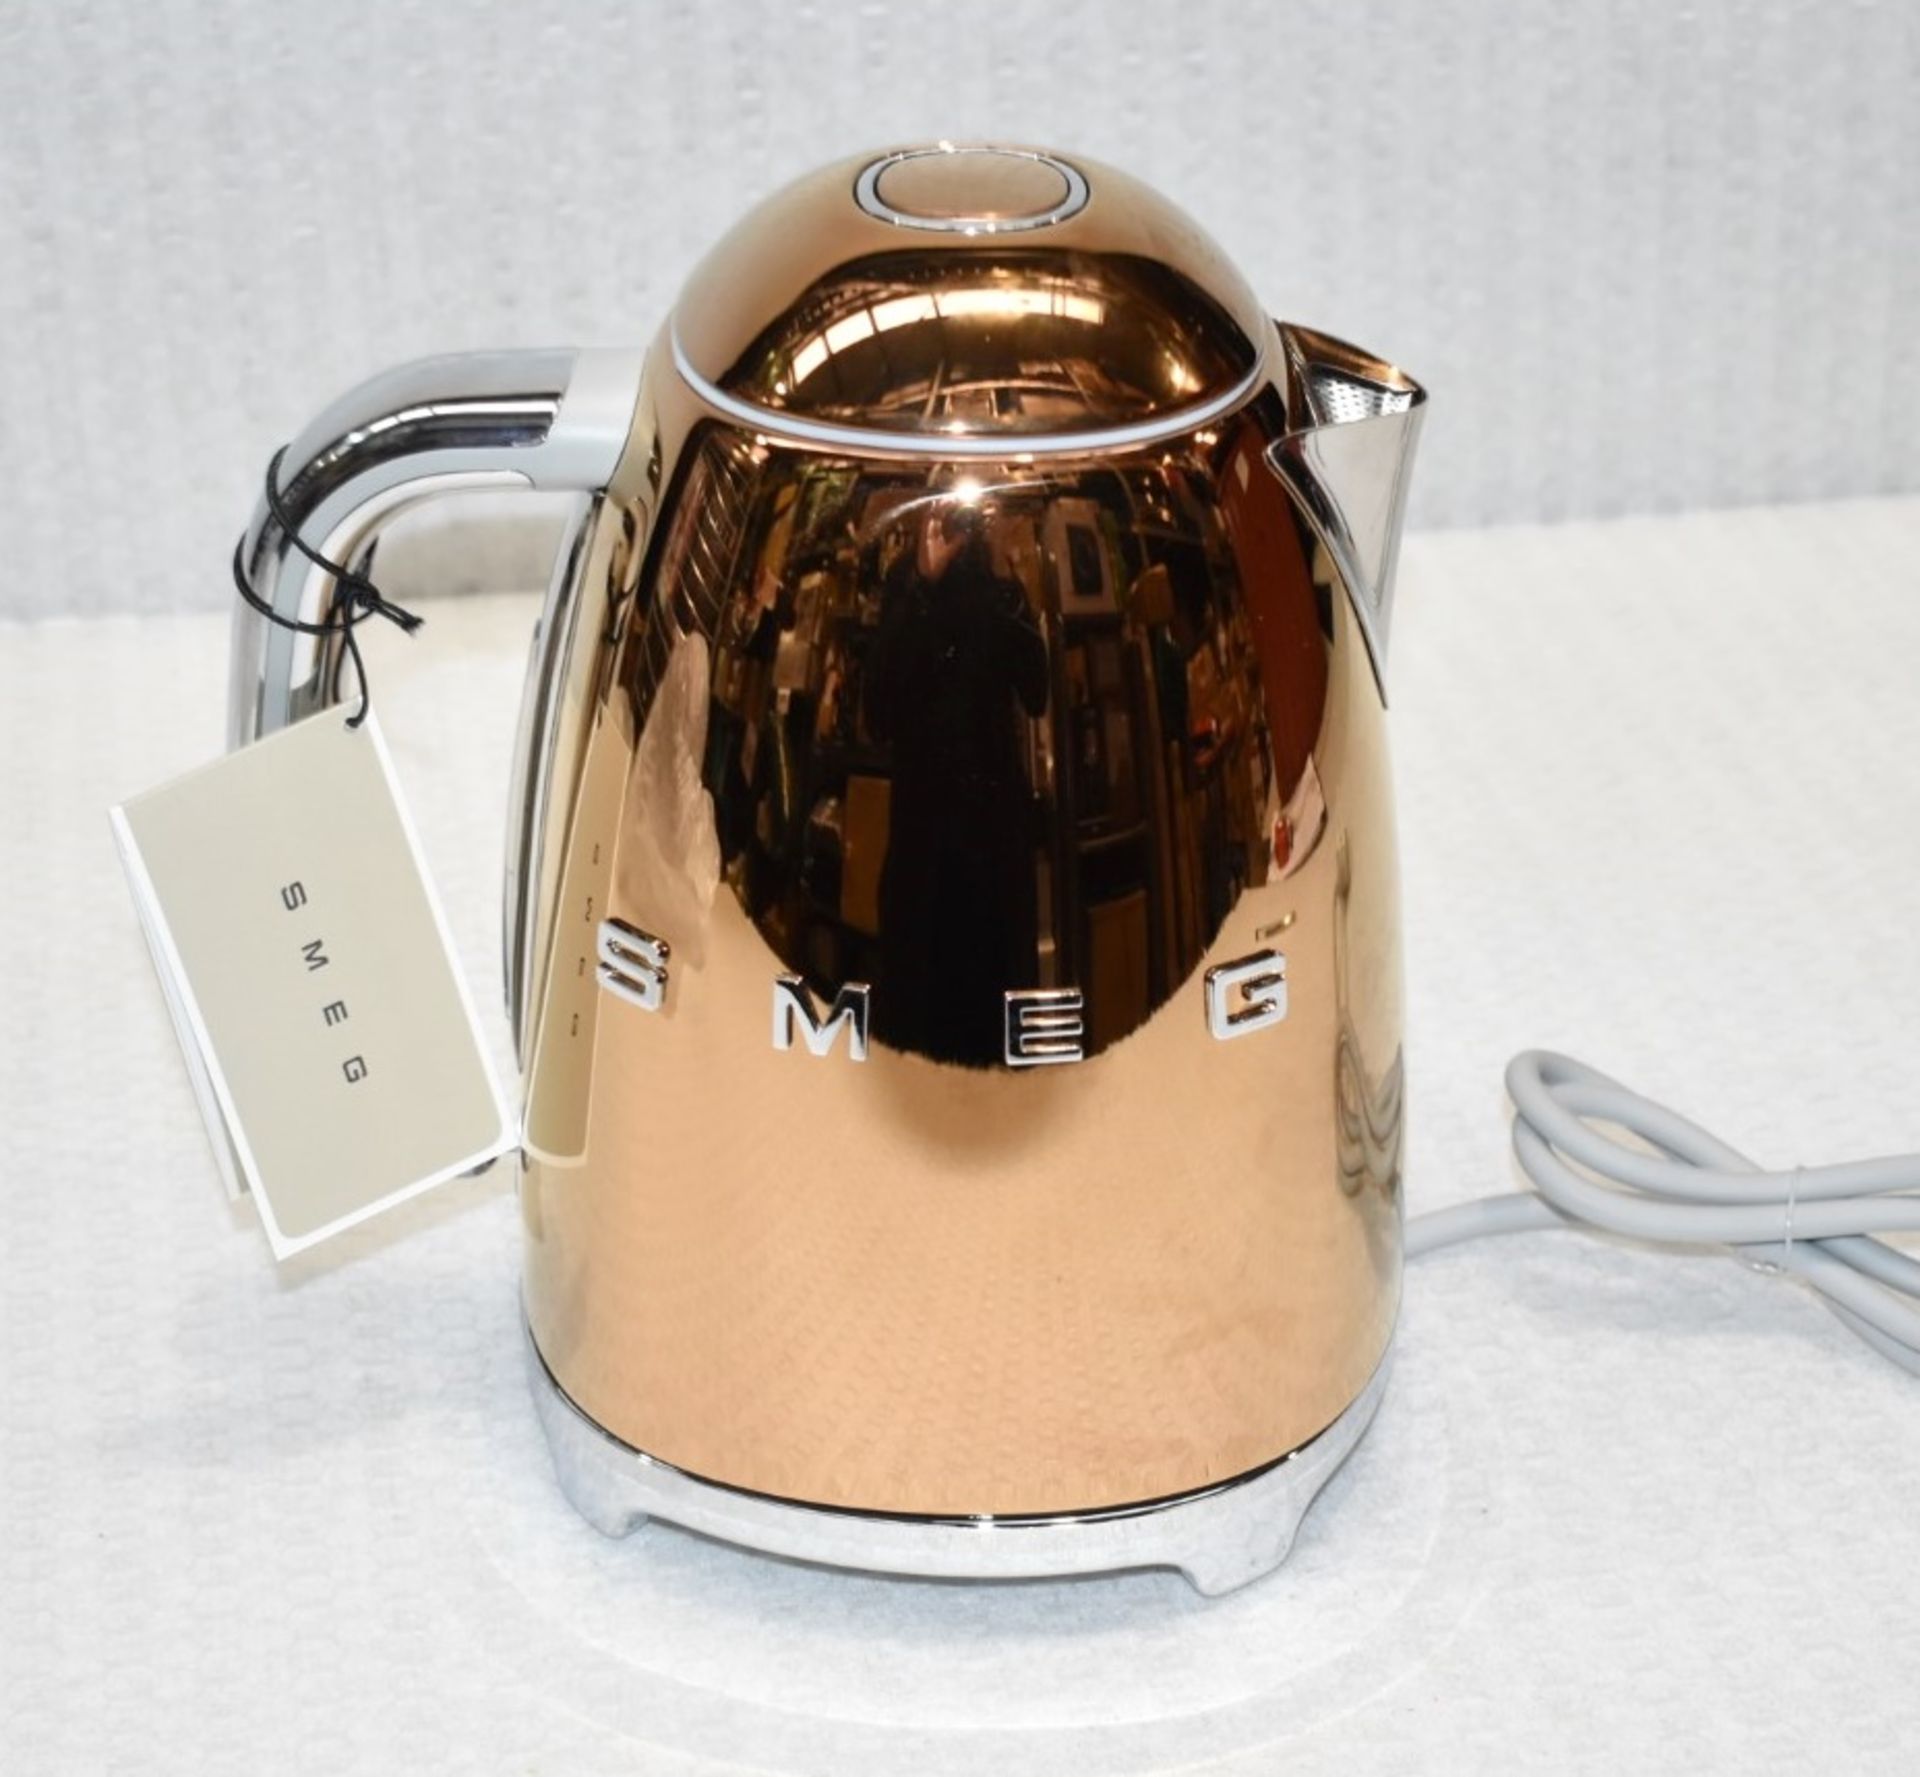 1 x SMEG 50’s Retro Style 1.7L Kettle with a Rose Gold Finish - Original Price £189.00 - Image 2 of 11